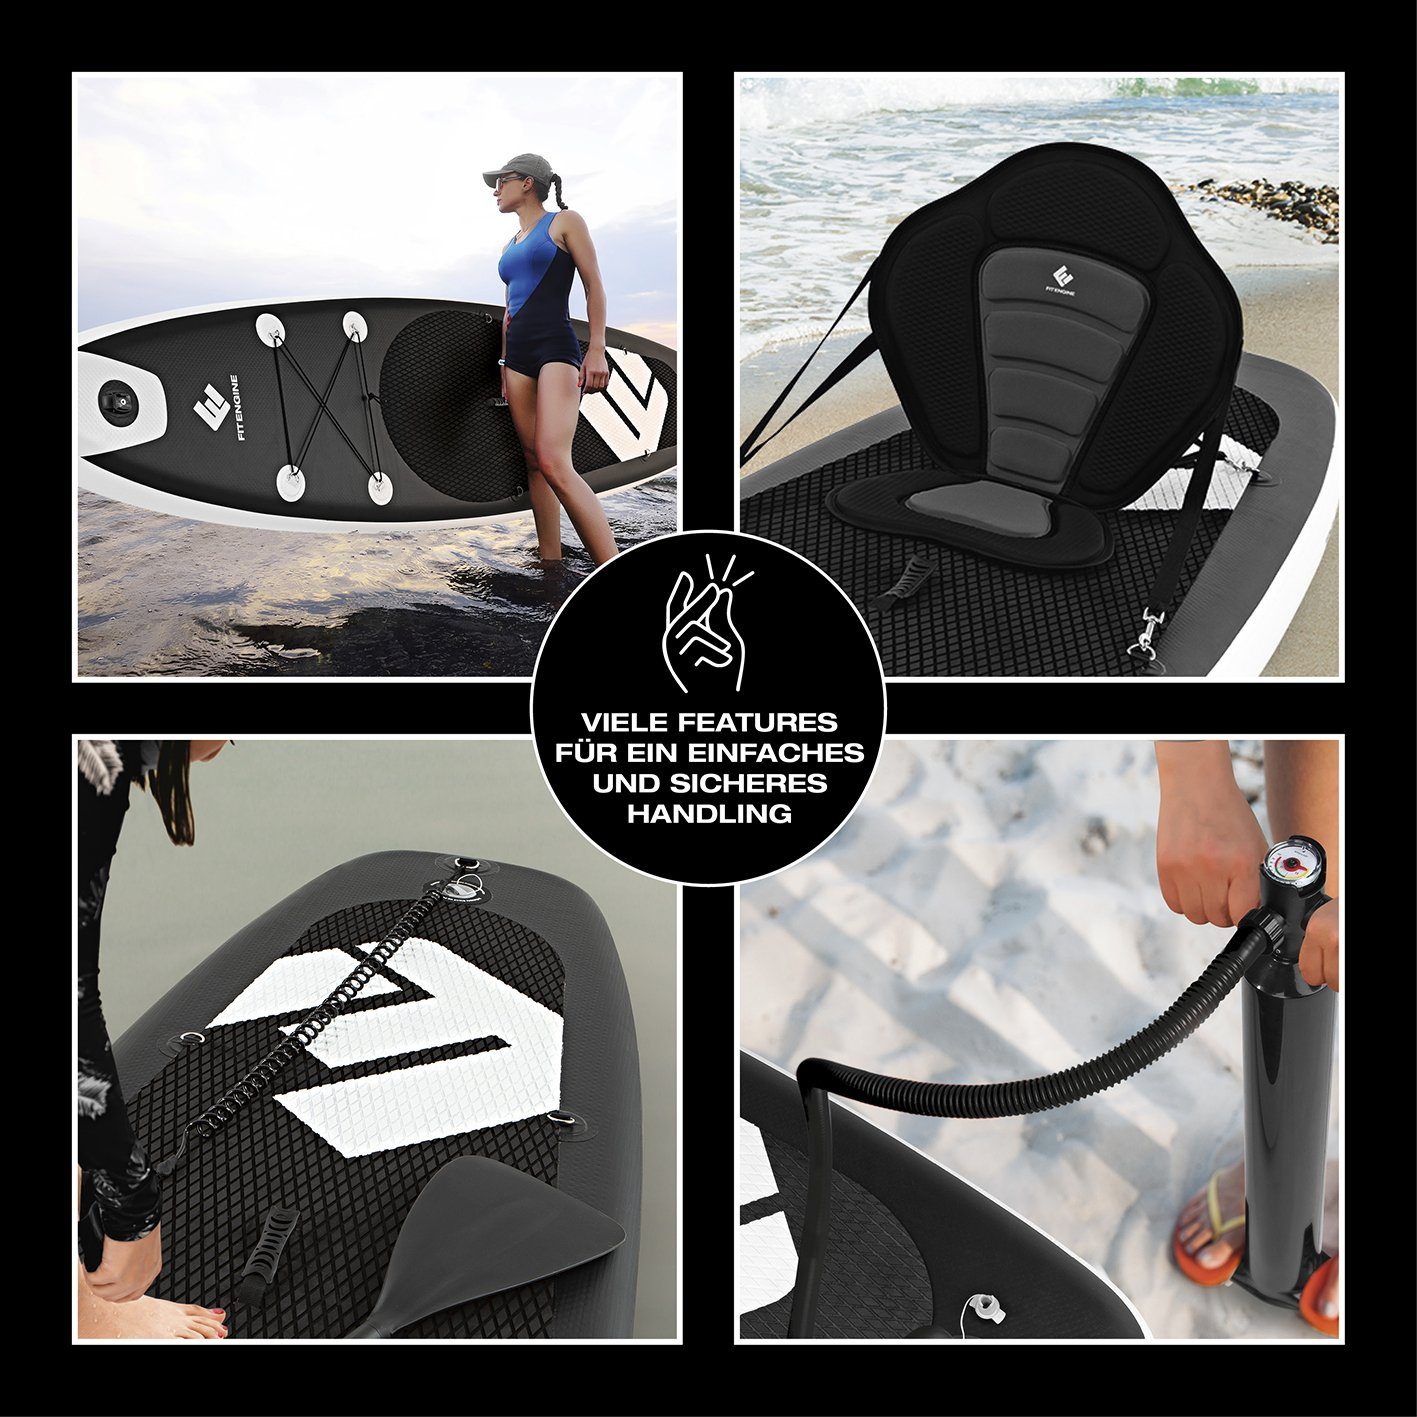 Sport Boards FitEngine Inflatable SUP-Board Trip SUP-Board Set (Allrounder) 10,8', 325cm, 140 kg, Stand-up aufblasbar Stand up P